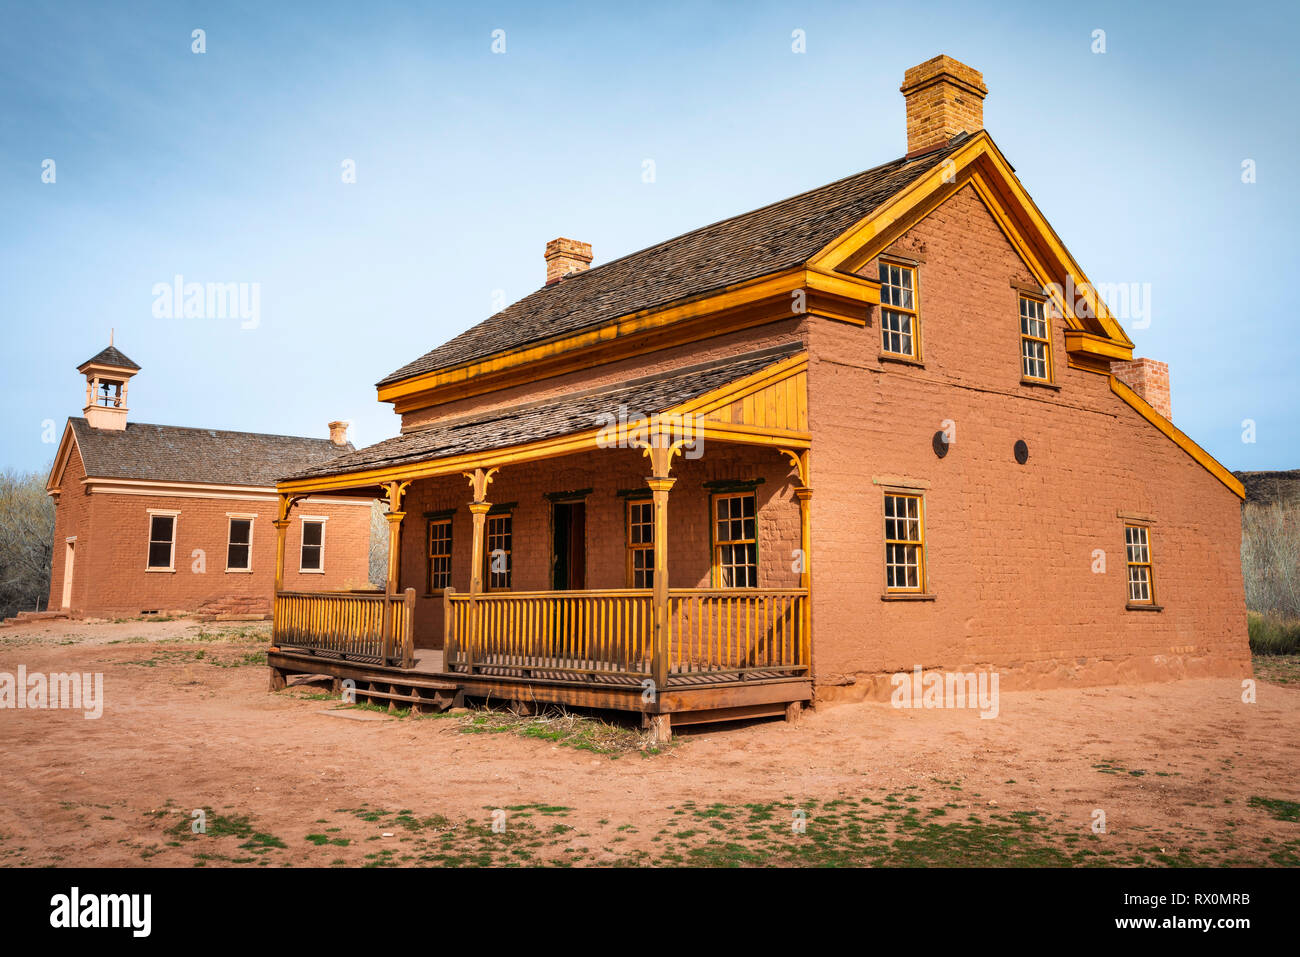 Alonzo Russell adobe house (featured in the film "Butch Cassidy and the Sundance Kid") and schoolhouse, Grafton ghost town, Utah USA Stock Photo